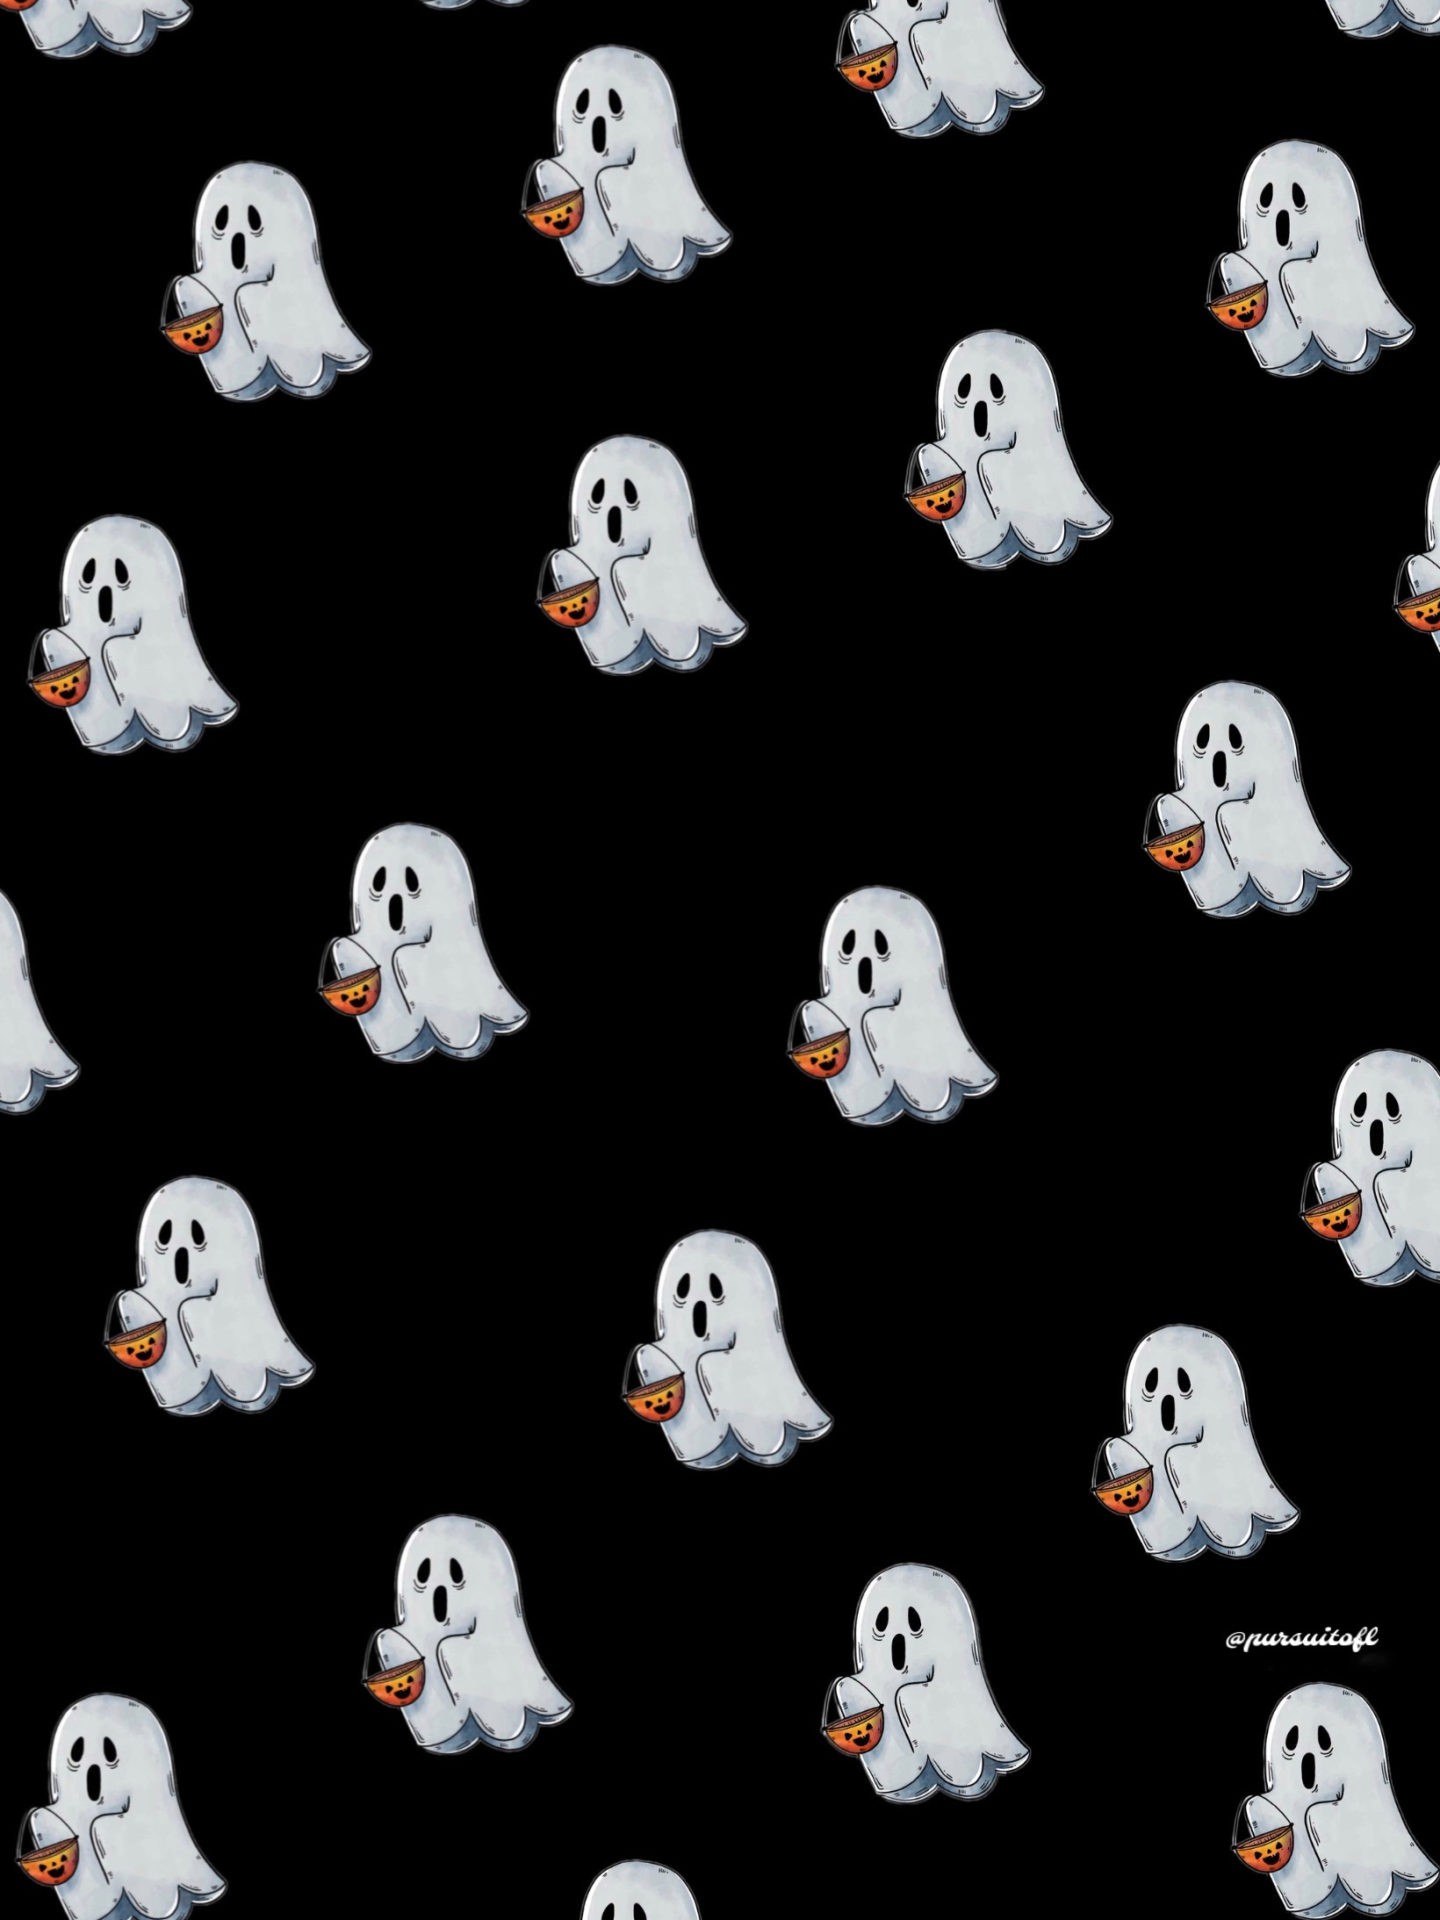 Black Tablet wallpaper with small halloween ghosts holding a trick-or-treat pumpkin